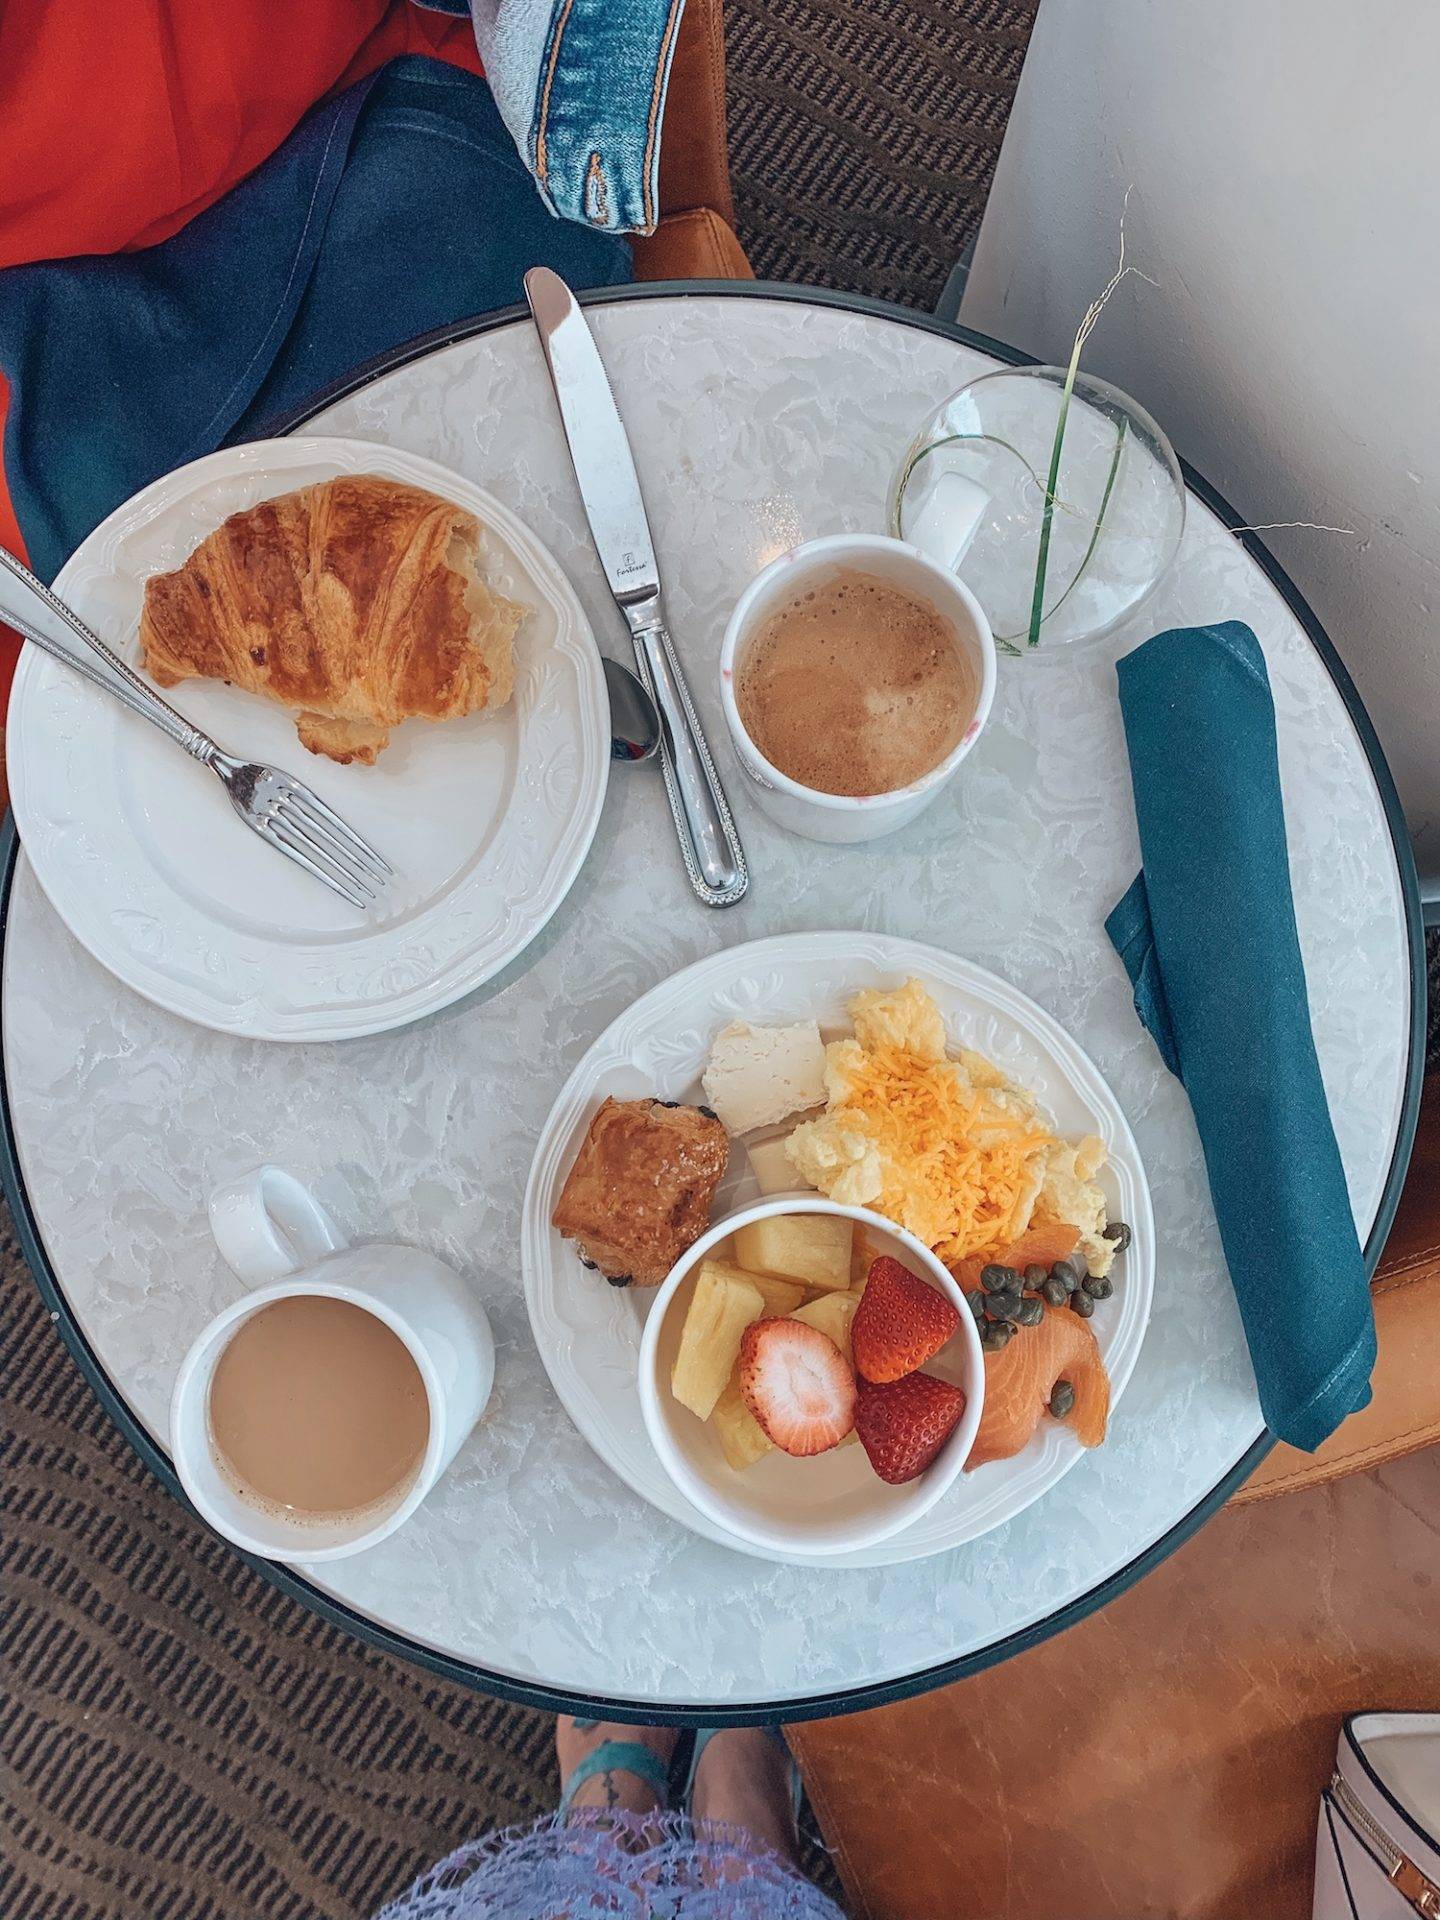 Where to stay in Chicago: The Fairmont Chicago Millenium Park. There are so many reasons why we loved staying with the Fairmont when we visited Chicago. Click the post to read my full review! Pictured here: The Fairmont Gold Lounge breakfast